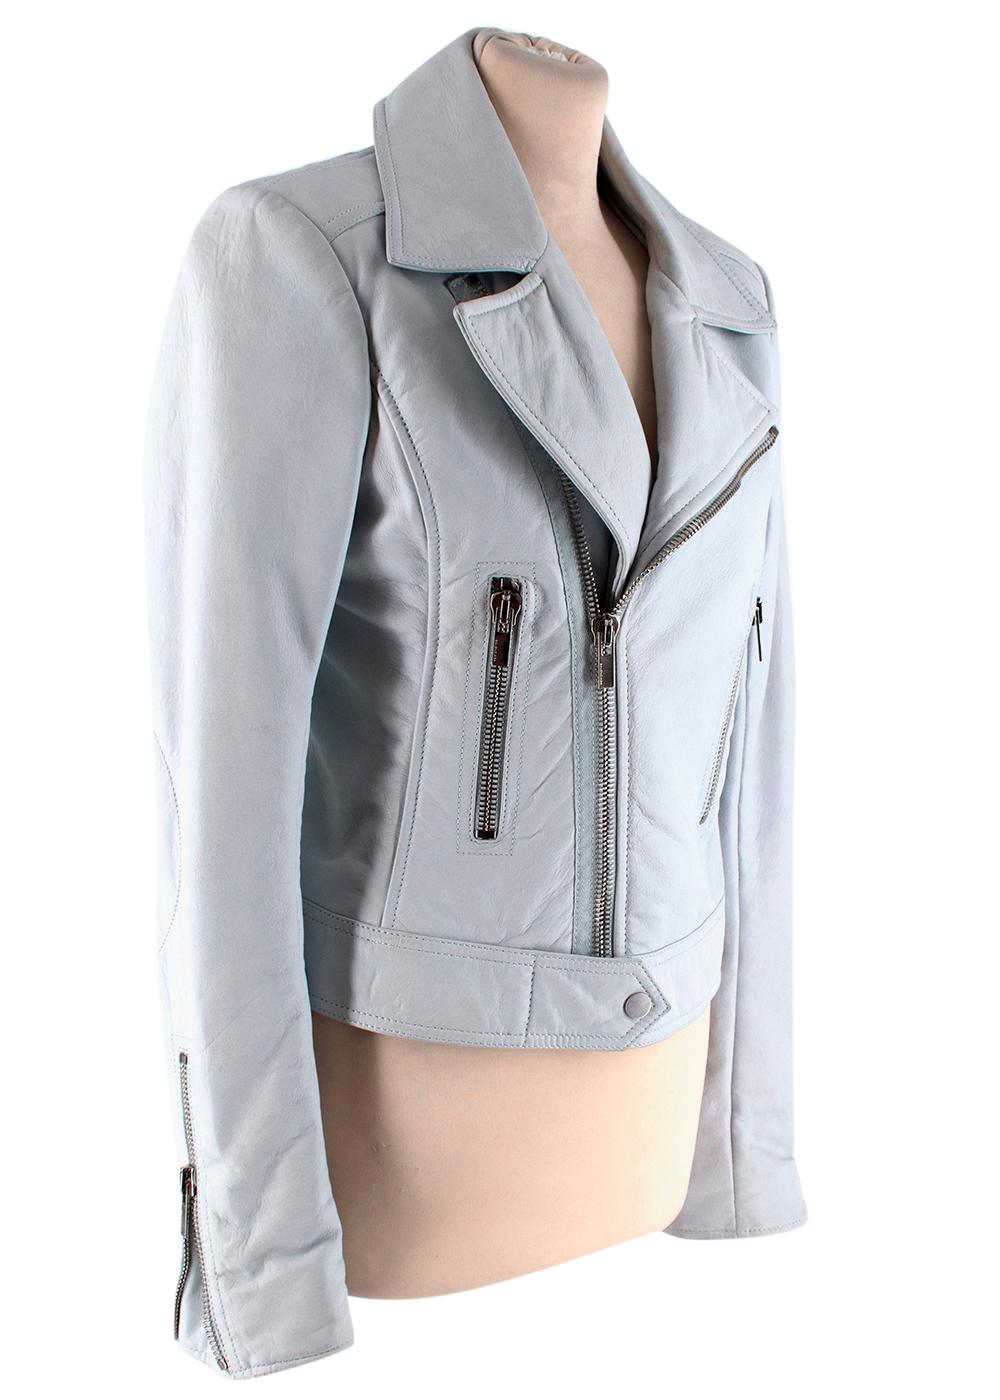 Balenciaga Lamb Skin Leather Jacket

- Soft lamb skin with a slight natural texture
- Padded shoulders for a structured look
- Silver zip hardware on the cuffs and front opening
- Pockets each side
- Ice blue hemlines
- Embroidered stitching on the